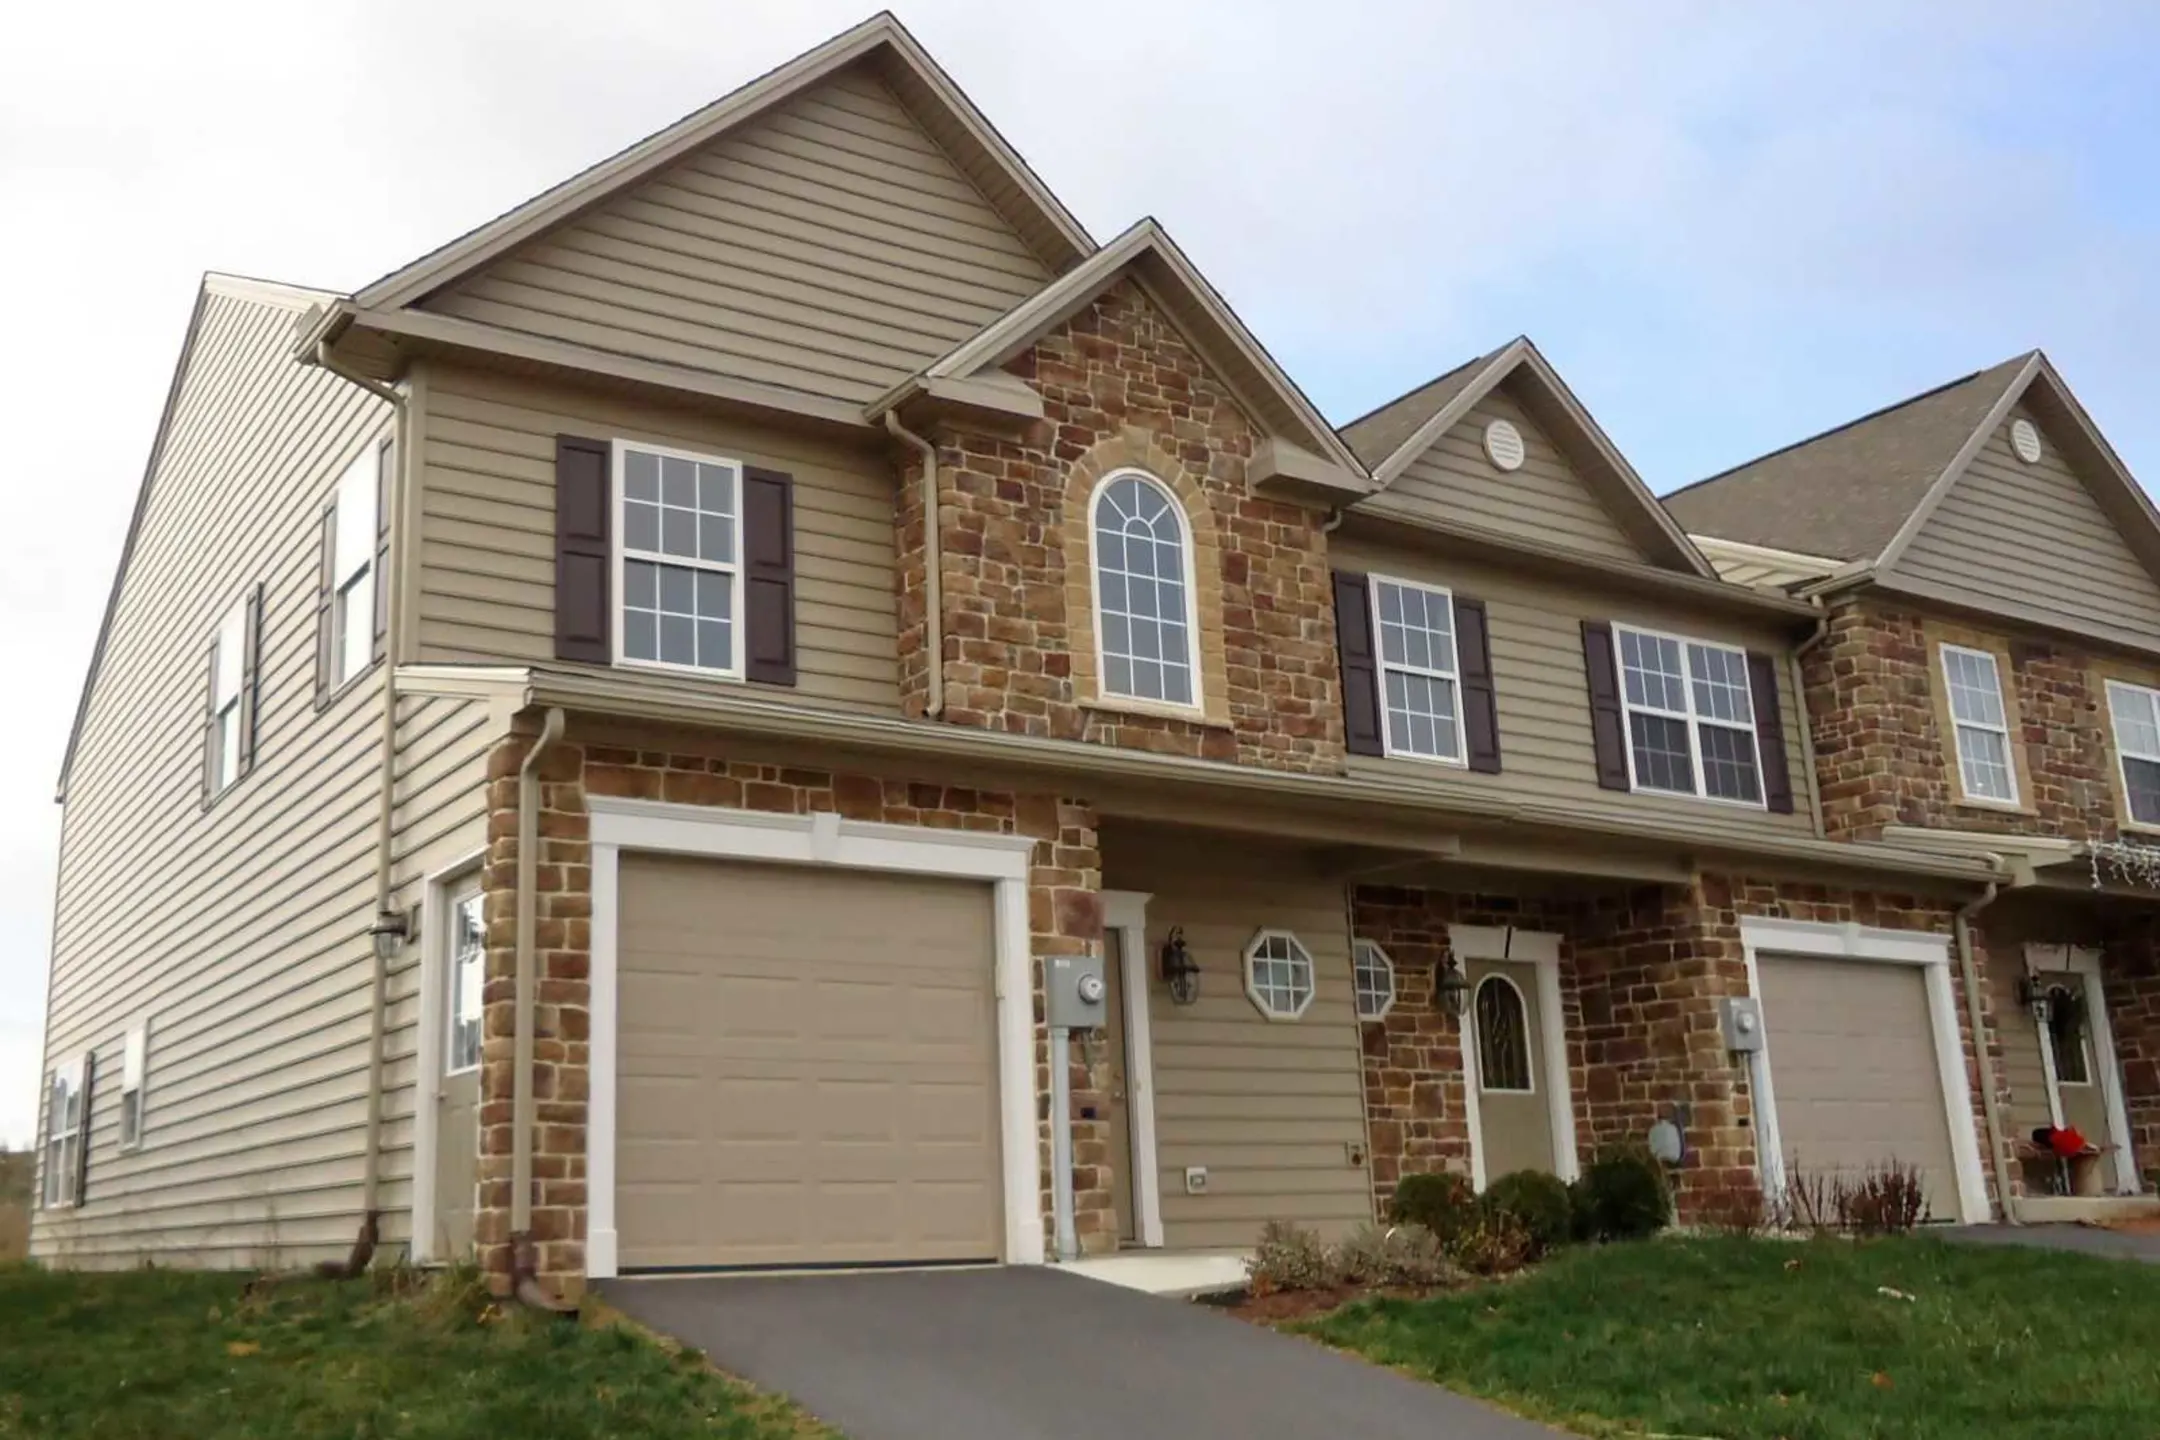 Building - Channing Drive Luxury Townhomes - Chambersburg, PA